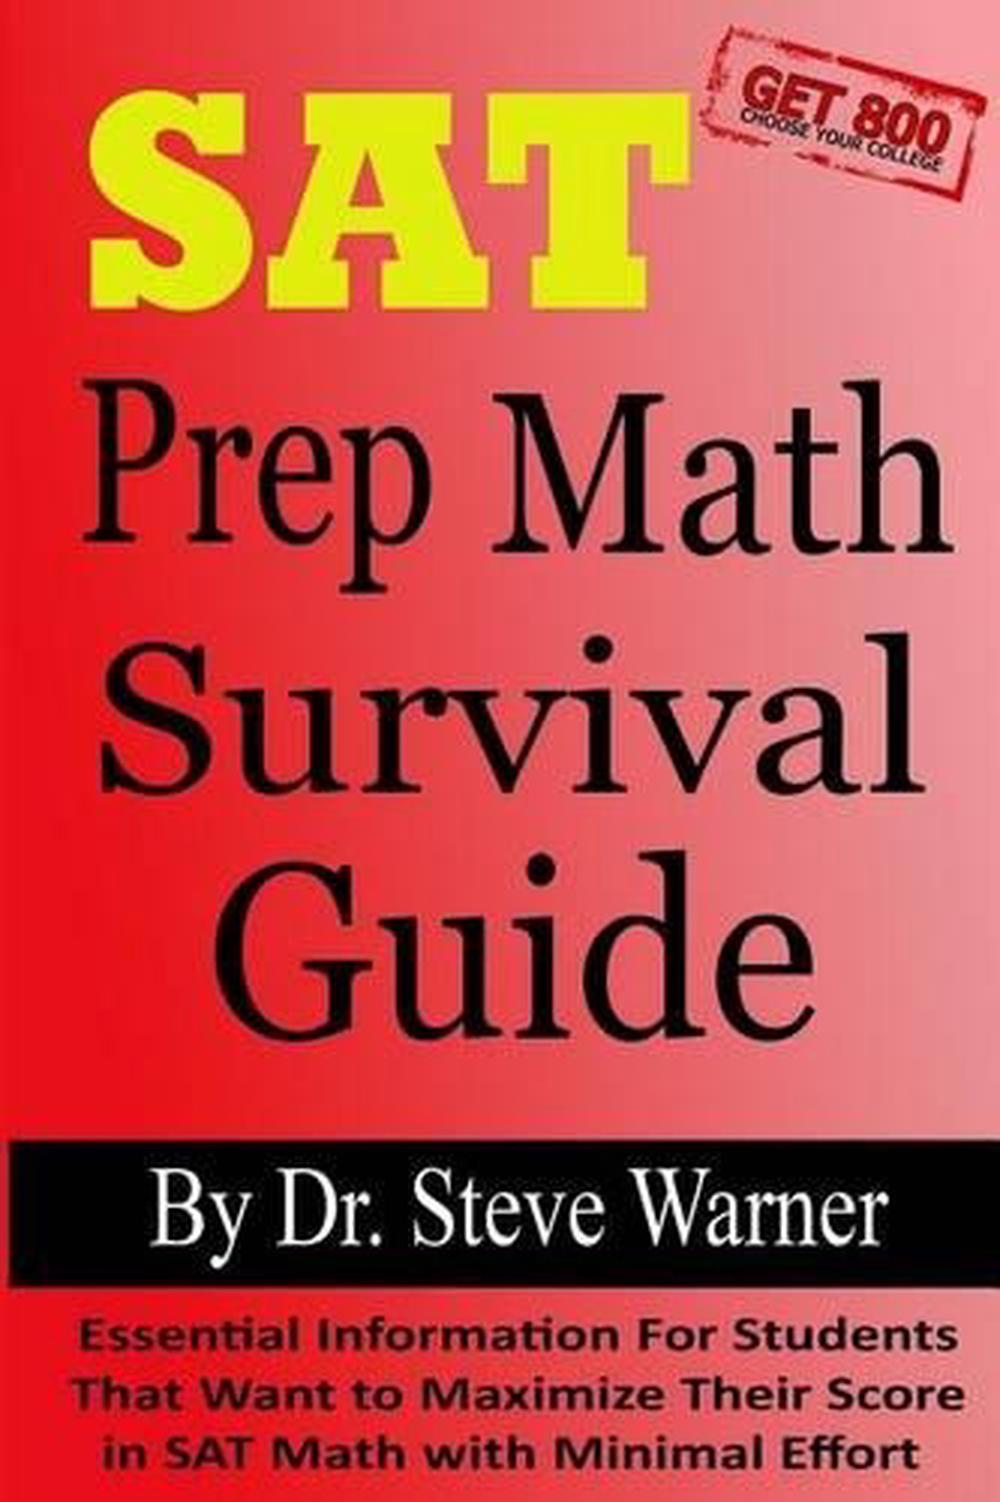 sat-prep-math-survival-guide-essential-information-for-students-that-want-to-ma-9781500752811